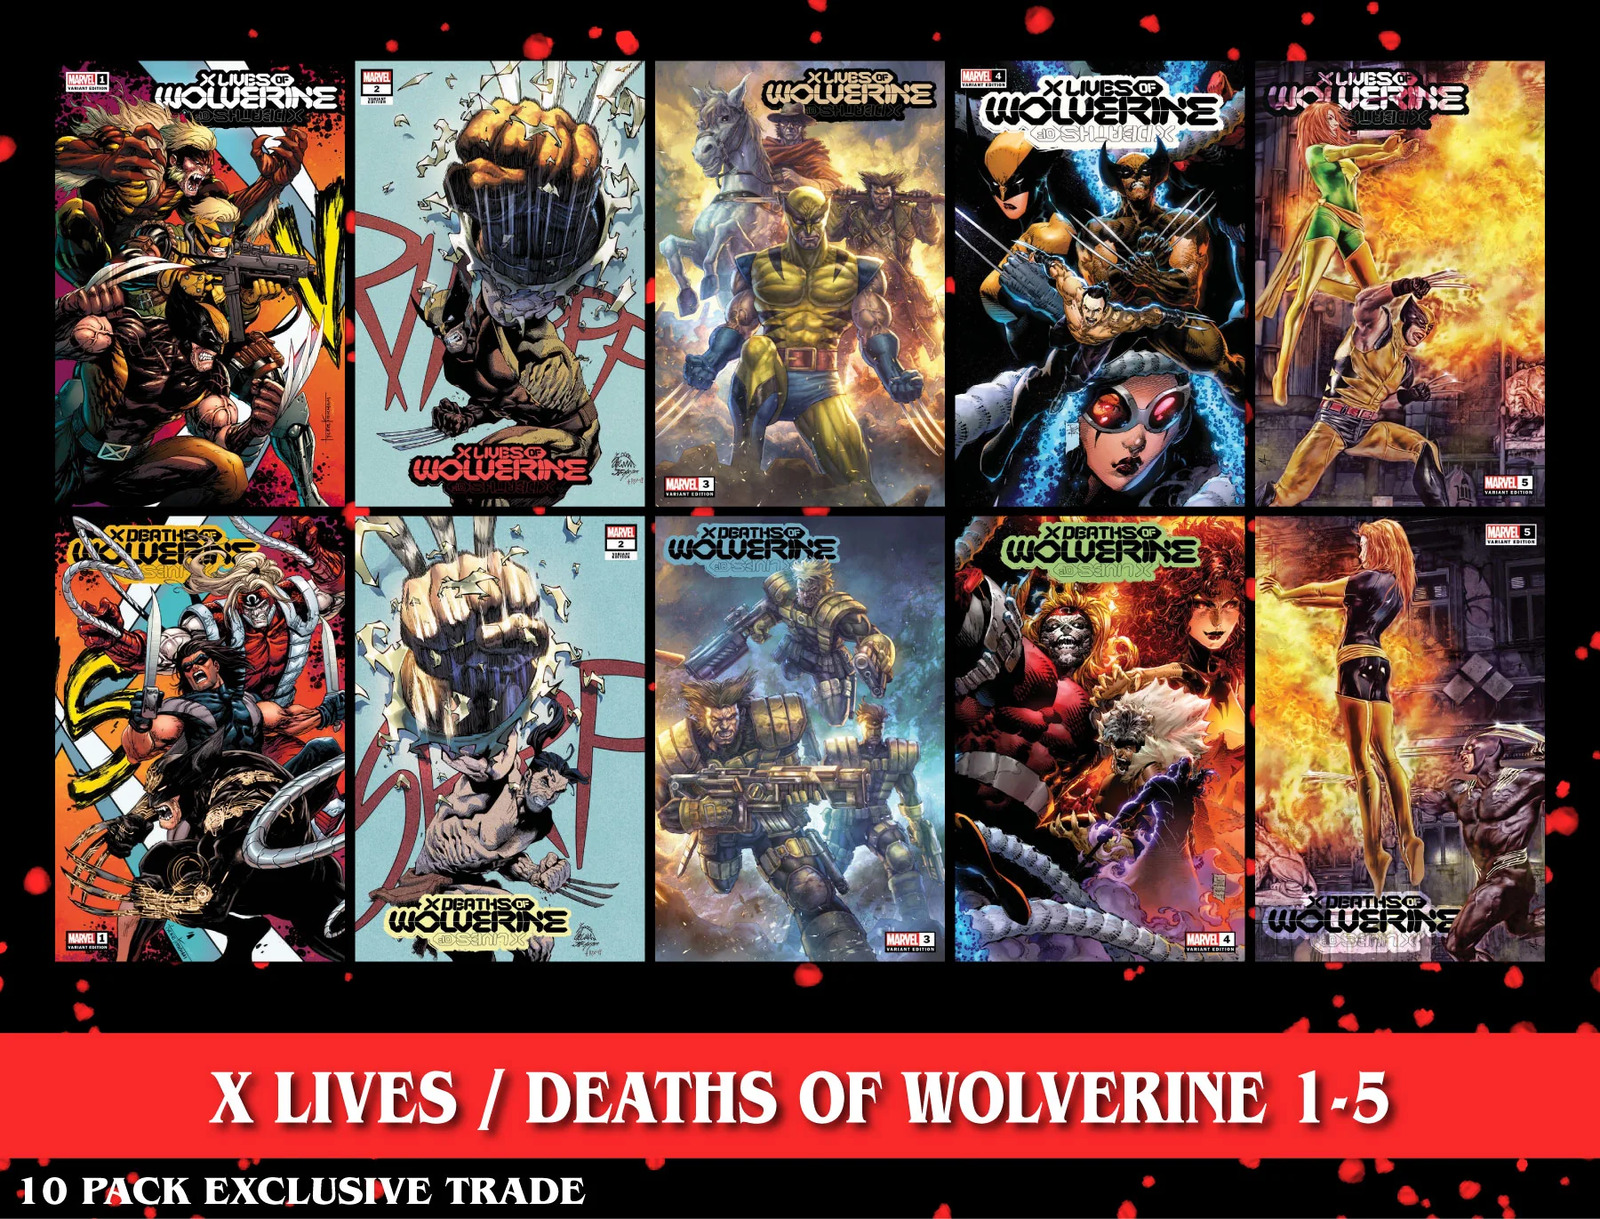 [10 PACK TRADE] X LIVES / DEATHS OF WOLVERINE 1-5 UNKNOWN COMICS EXCLUSIVE CONNE